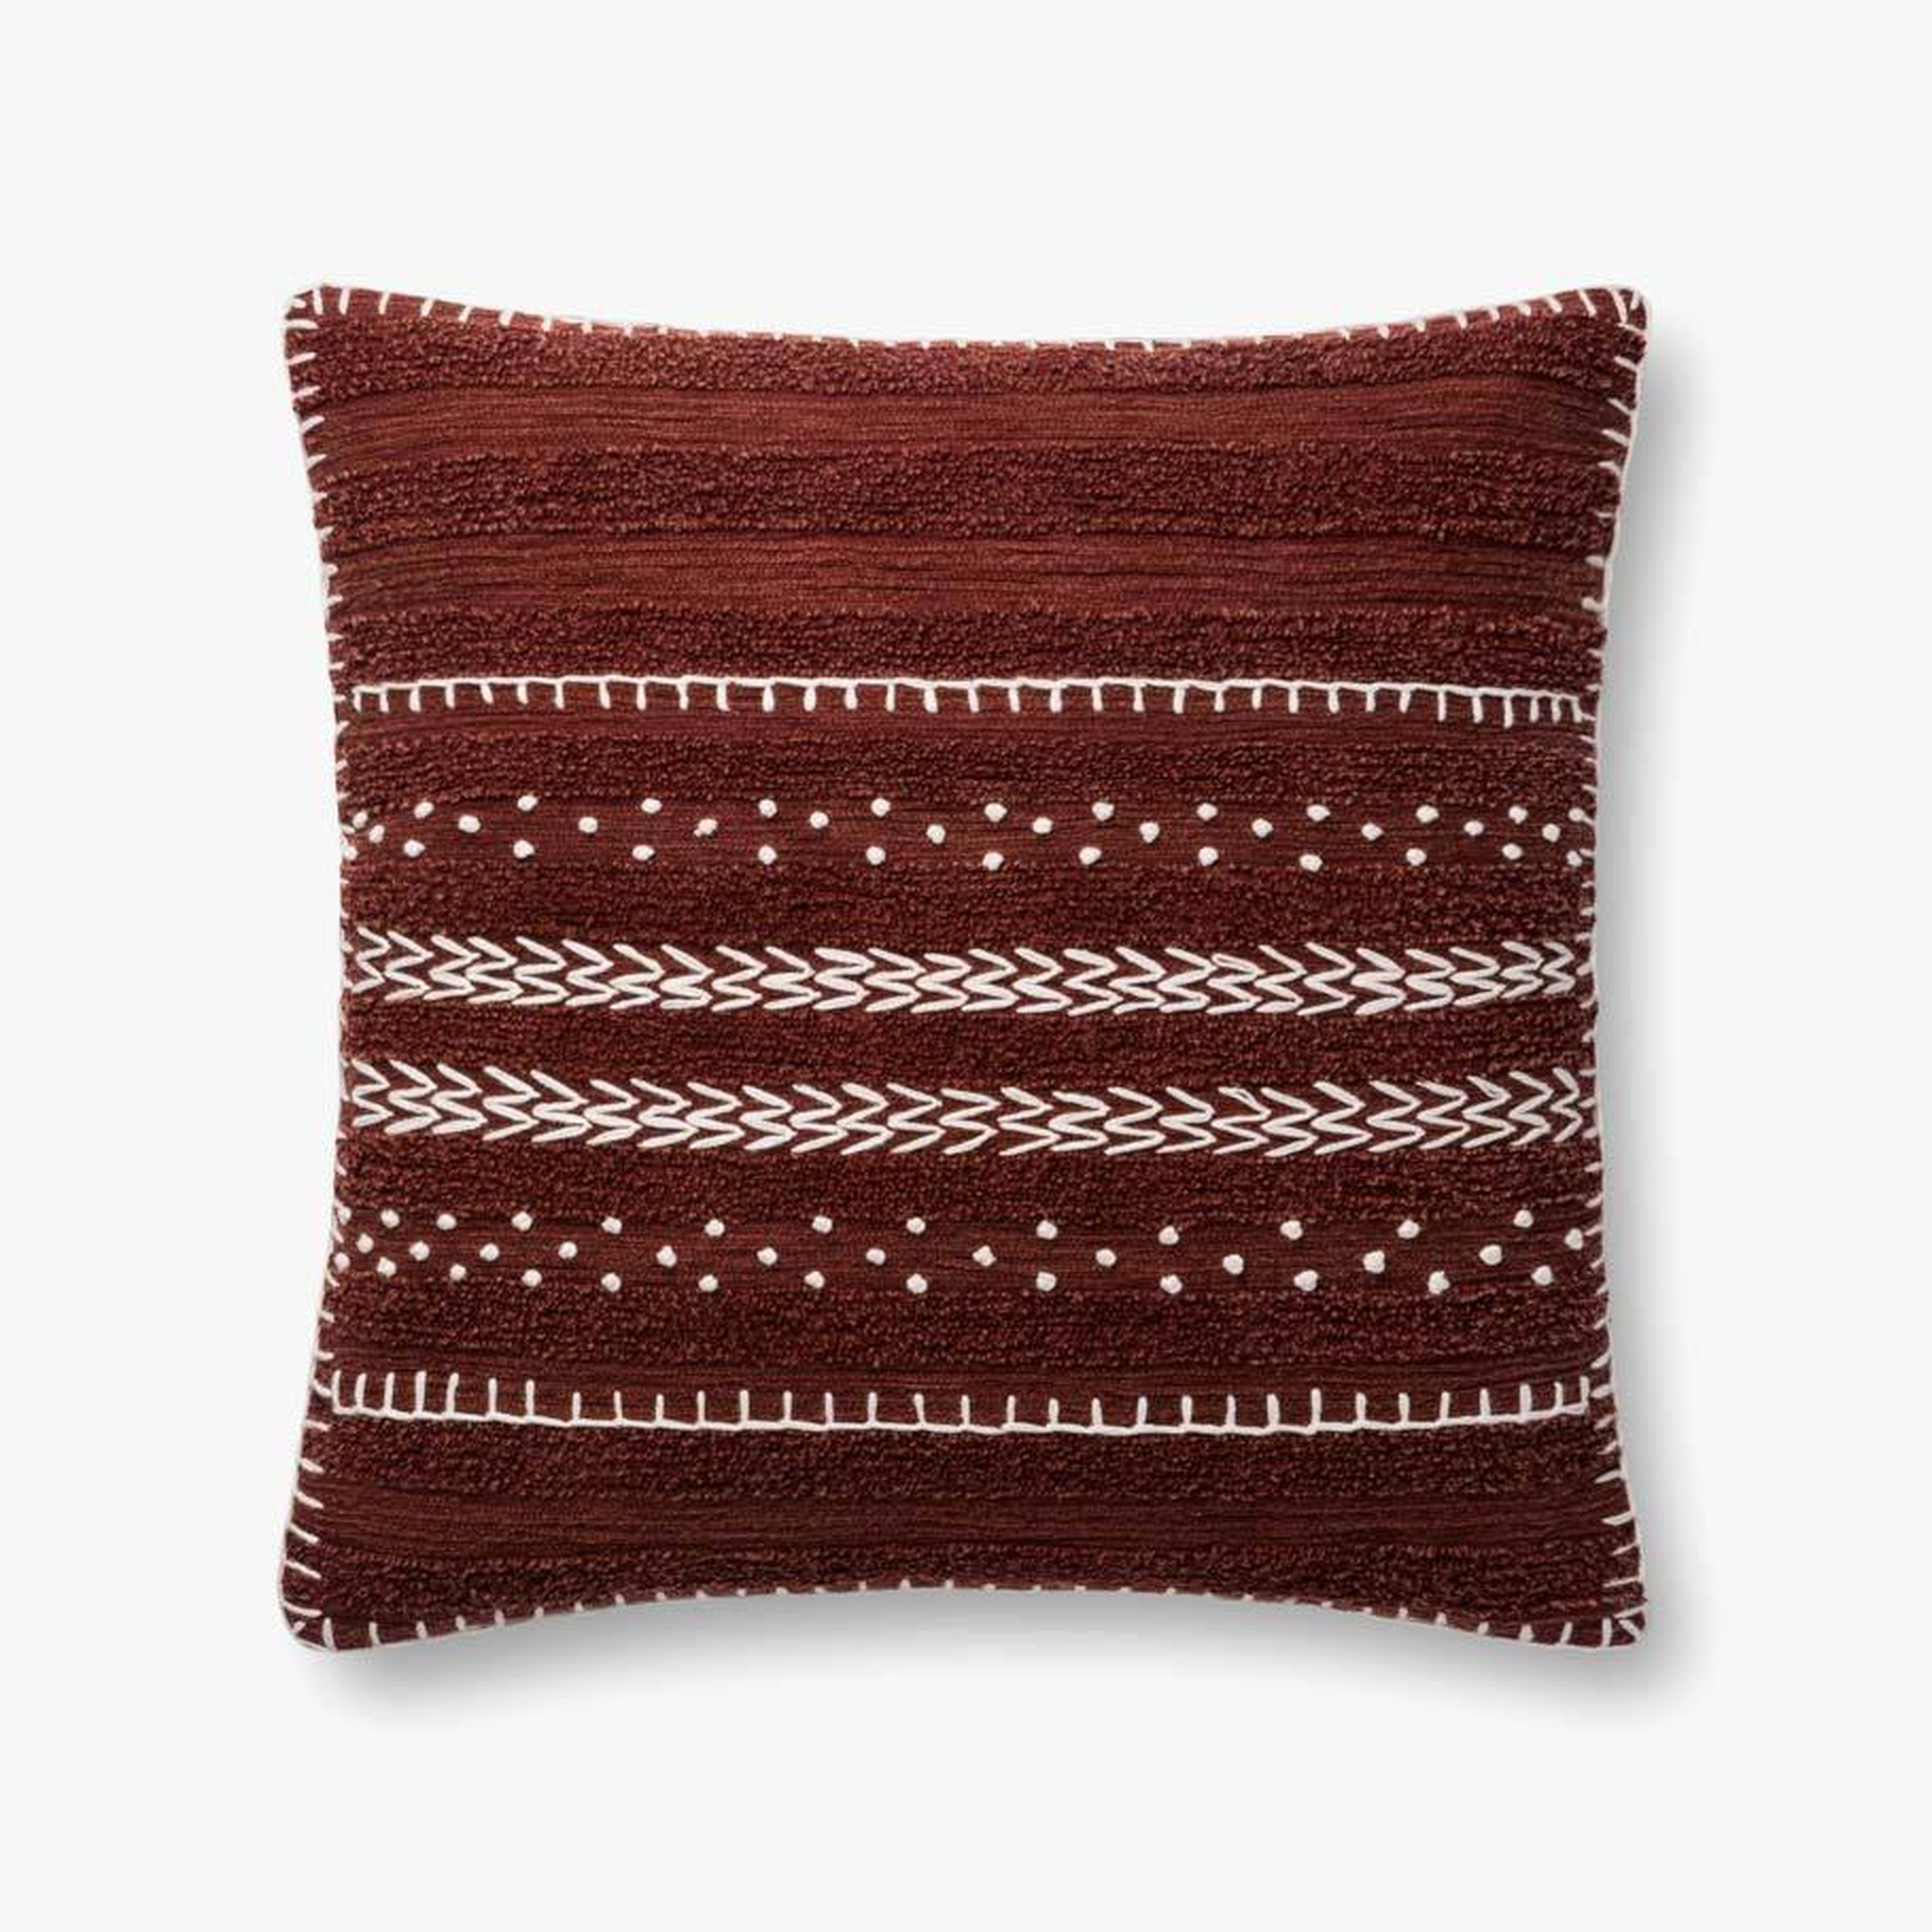 P4095 BURGUNDY 22" x 22" Pillow Cover w/Poly - Loloi Rugs